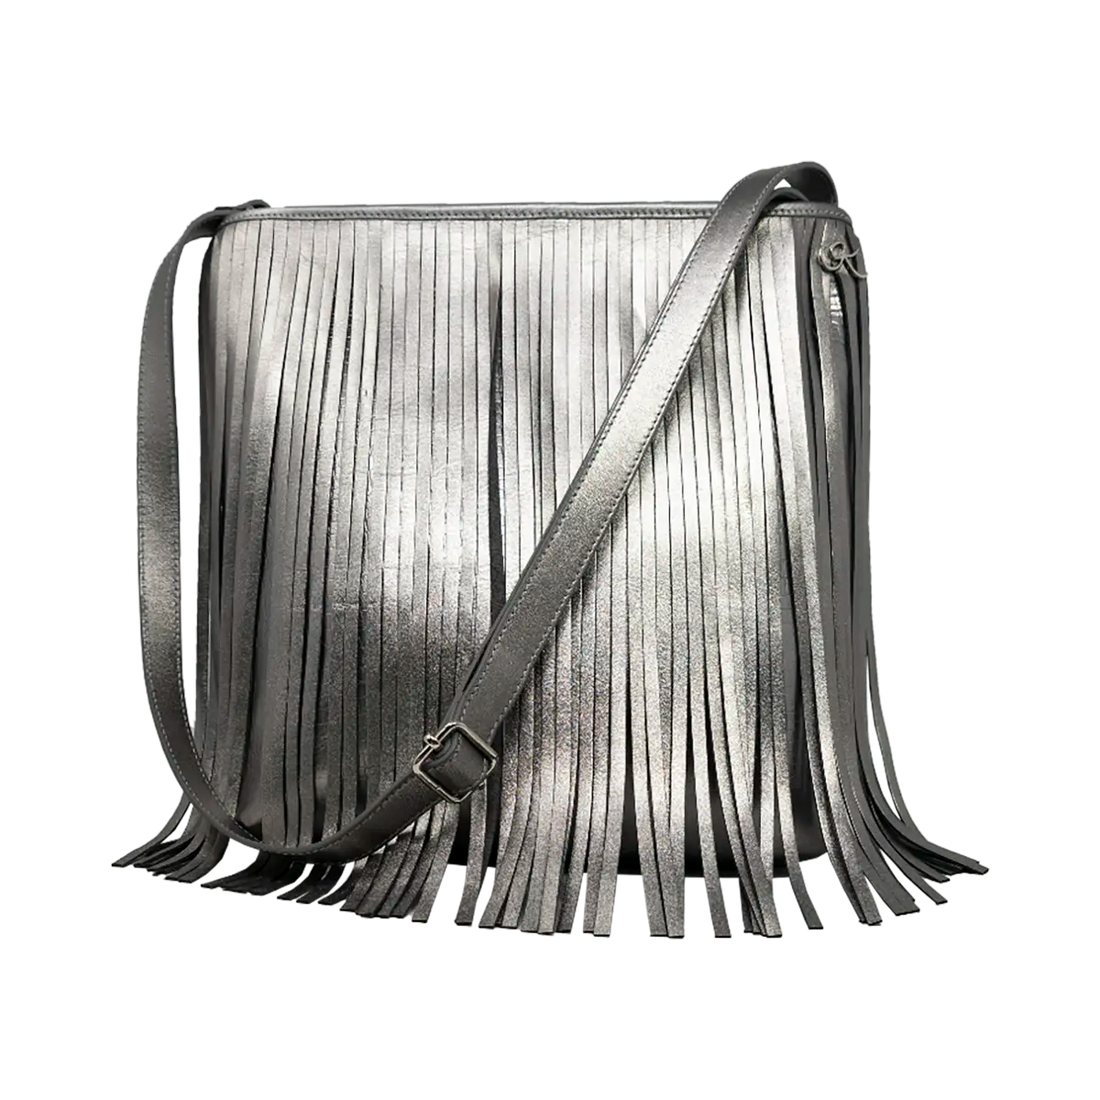 large silver leather crossbody bag with fringe. Fashion accessory for women in San Diego, CA.